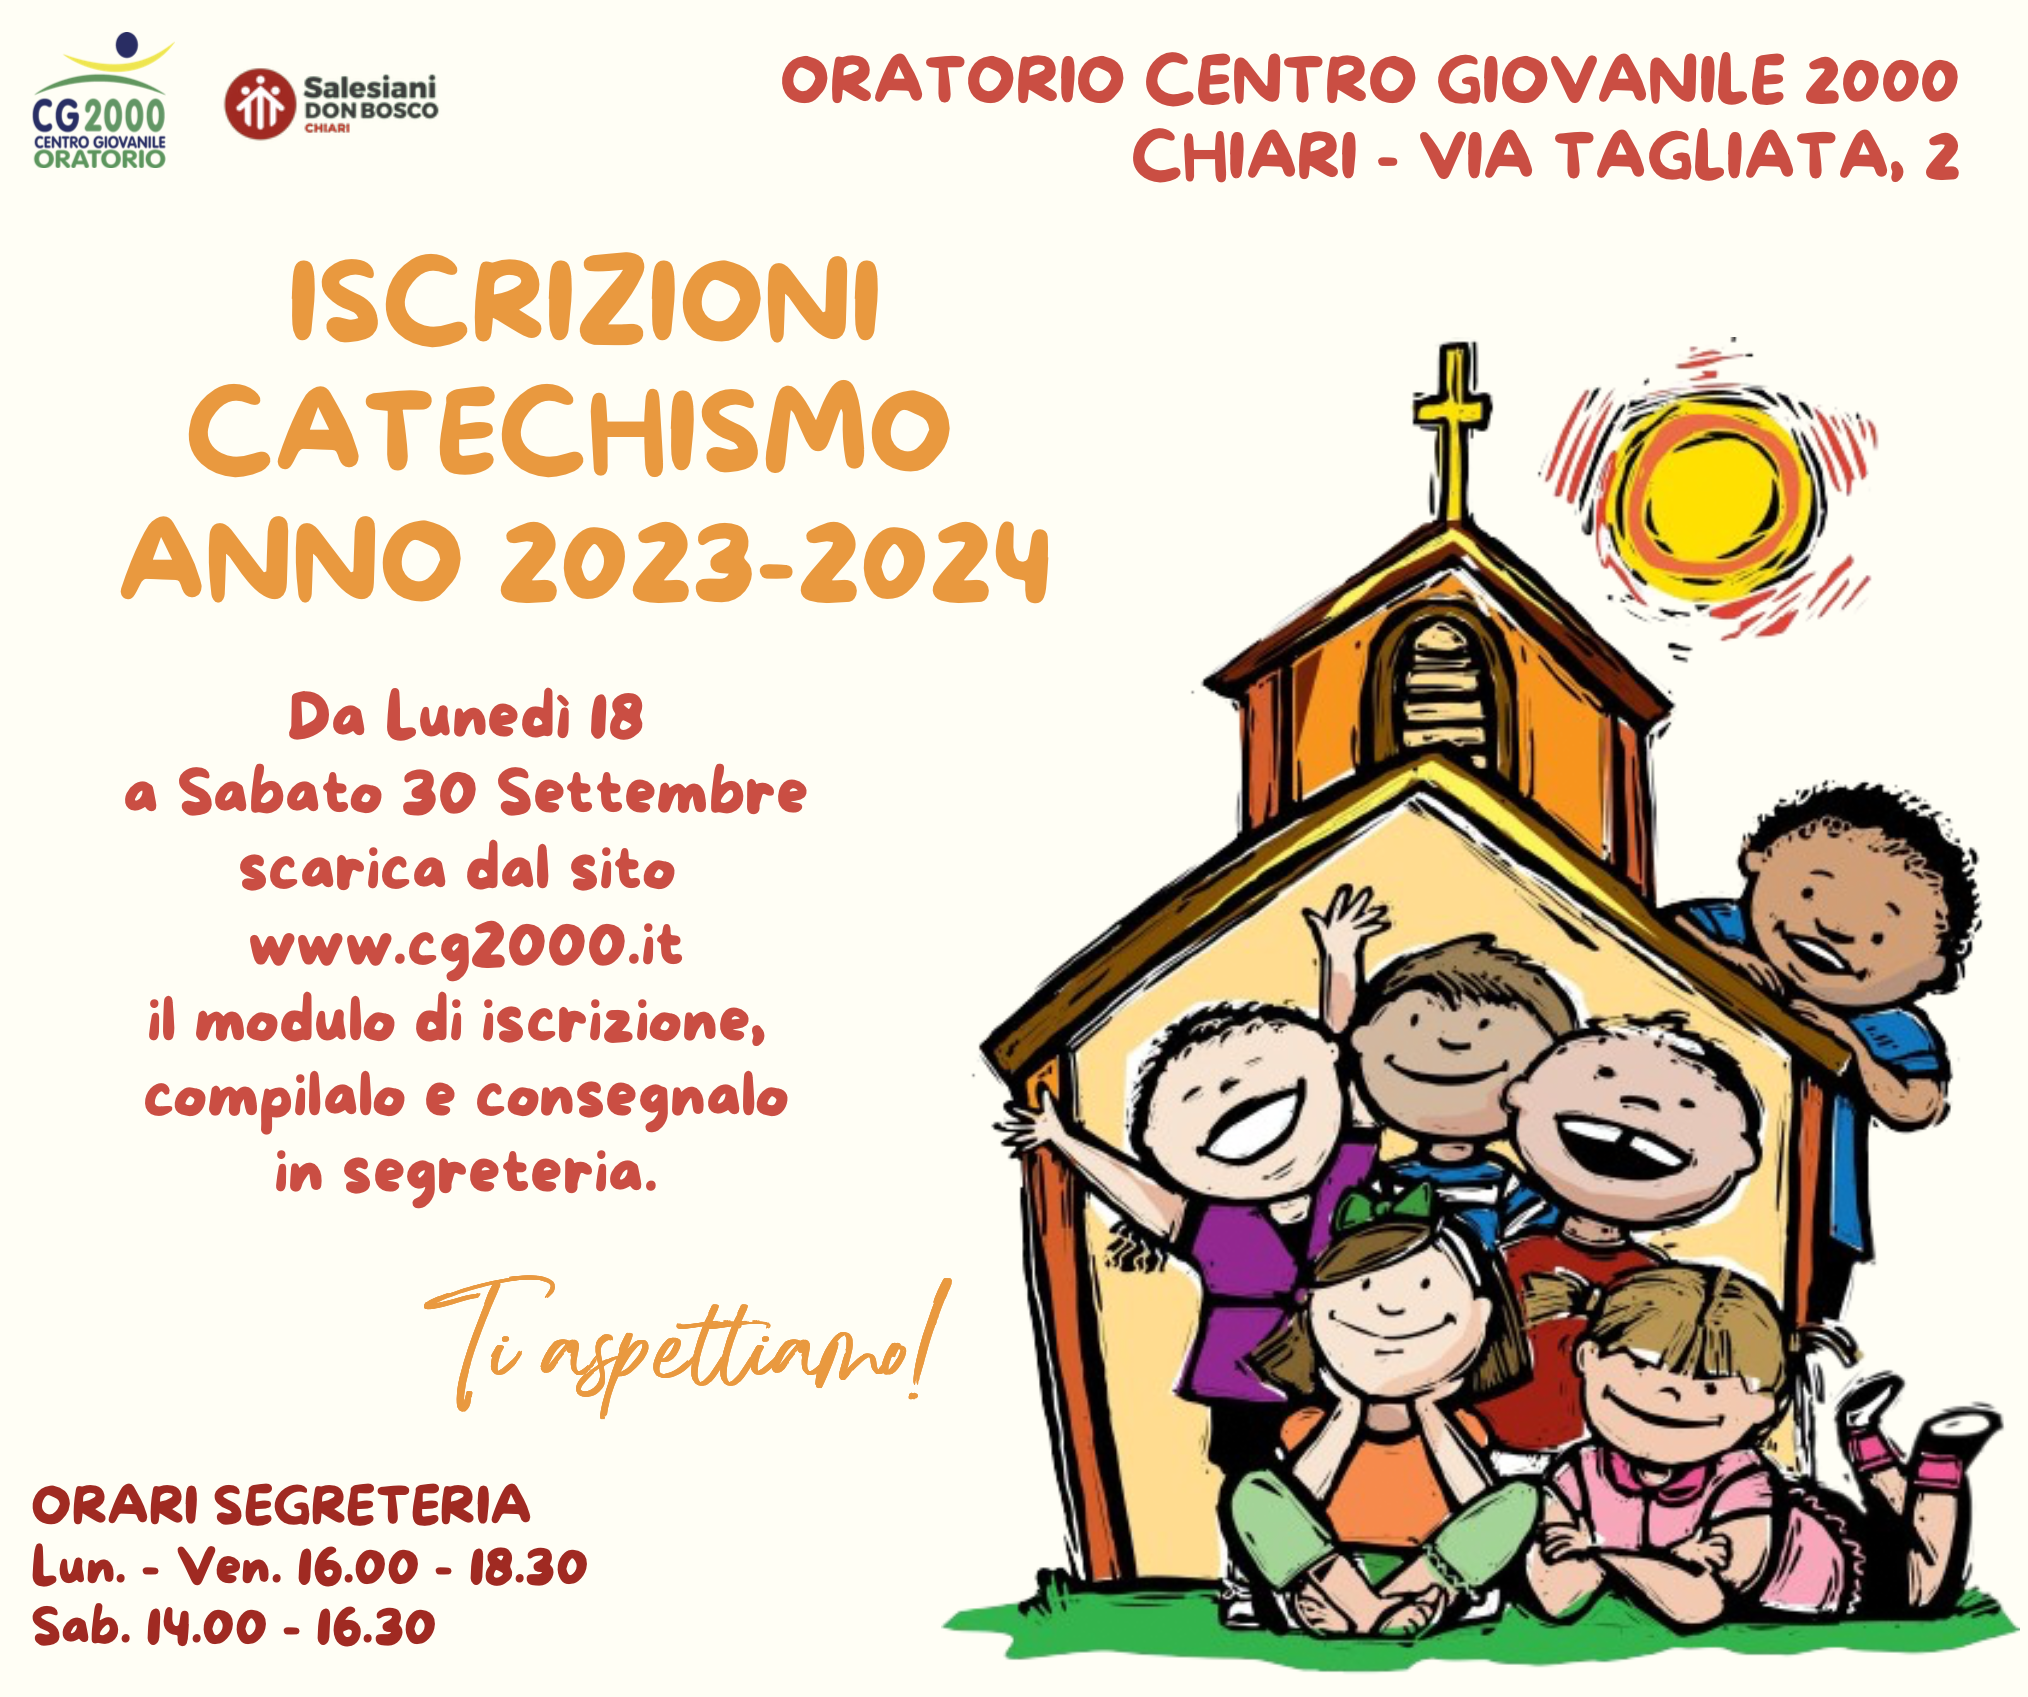 You are currently viewing Iscrizioni Catechismo anno 2023-2024